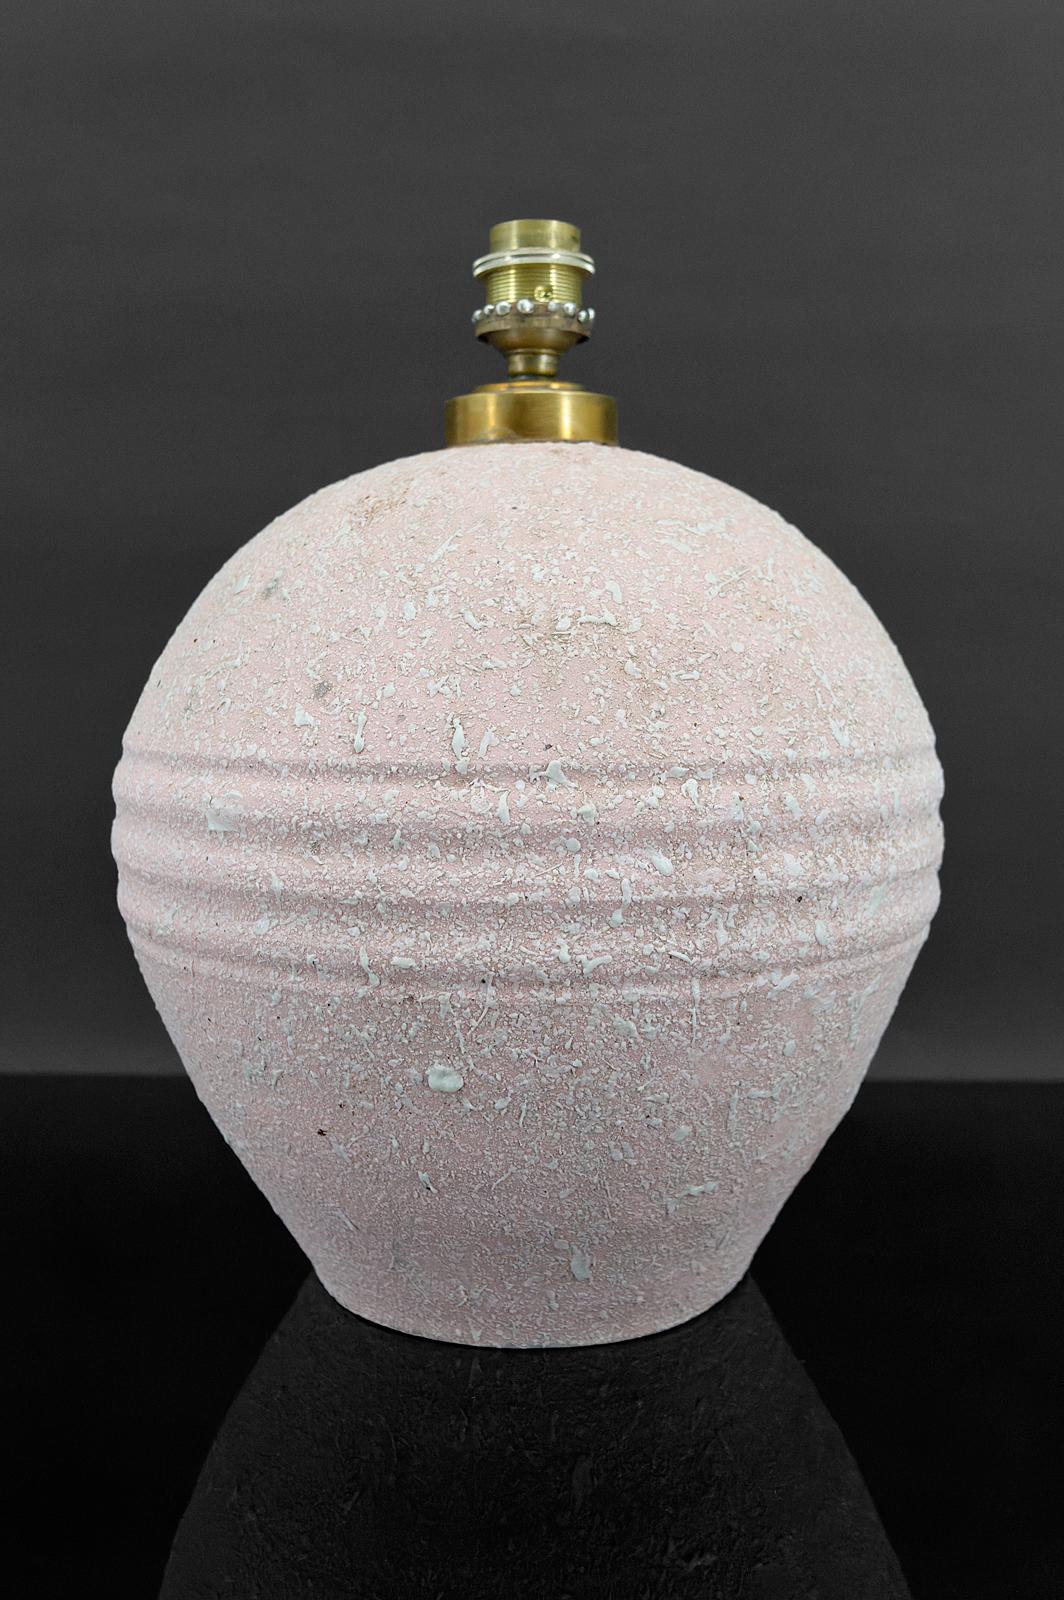 
Ceramic lamp with white crisp enamel on a pink background.
In the style of Jean Besnard
Art Deco, France, Circa 1925.

In good condition. Electricity OK.

Dimensions:
Height 21 cm
Diameter 24 cm